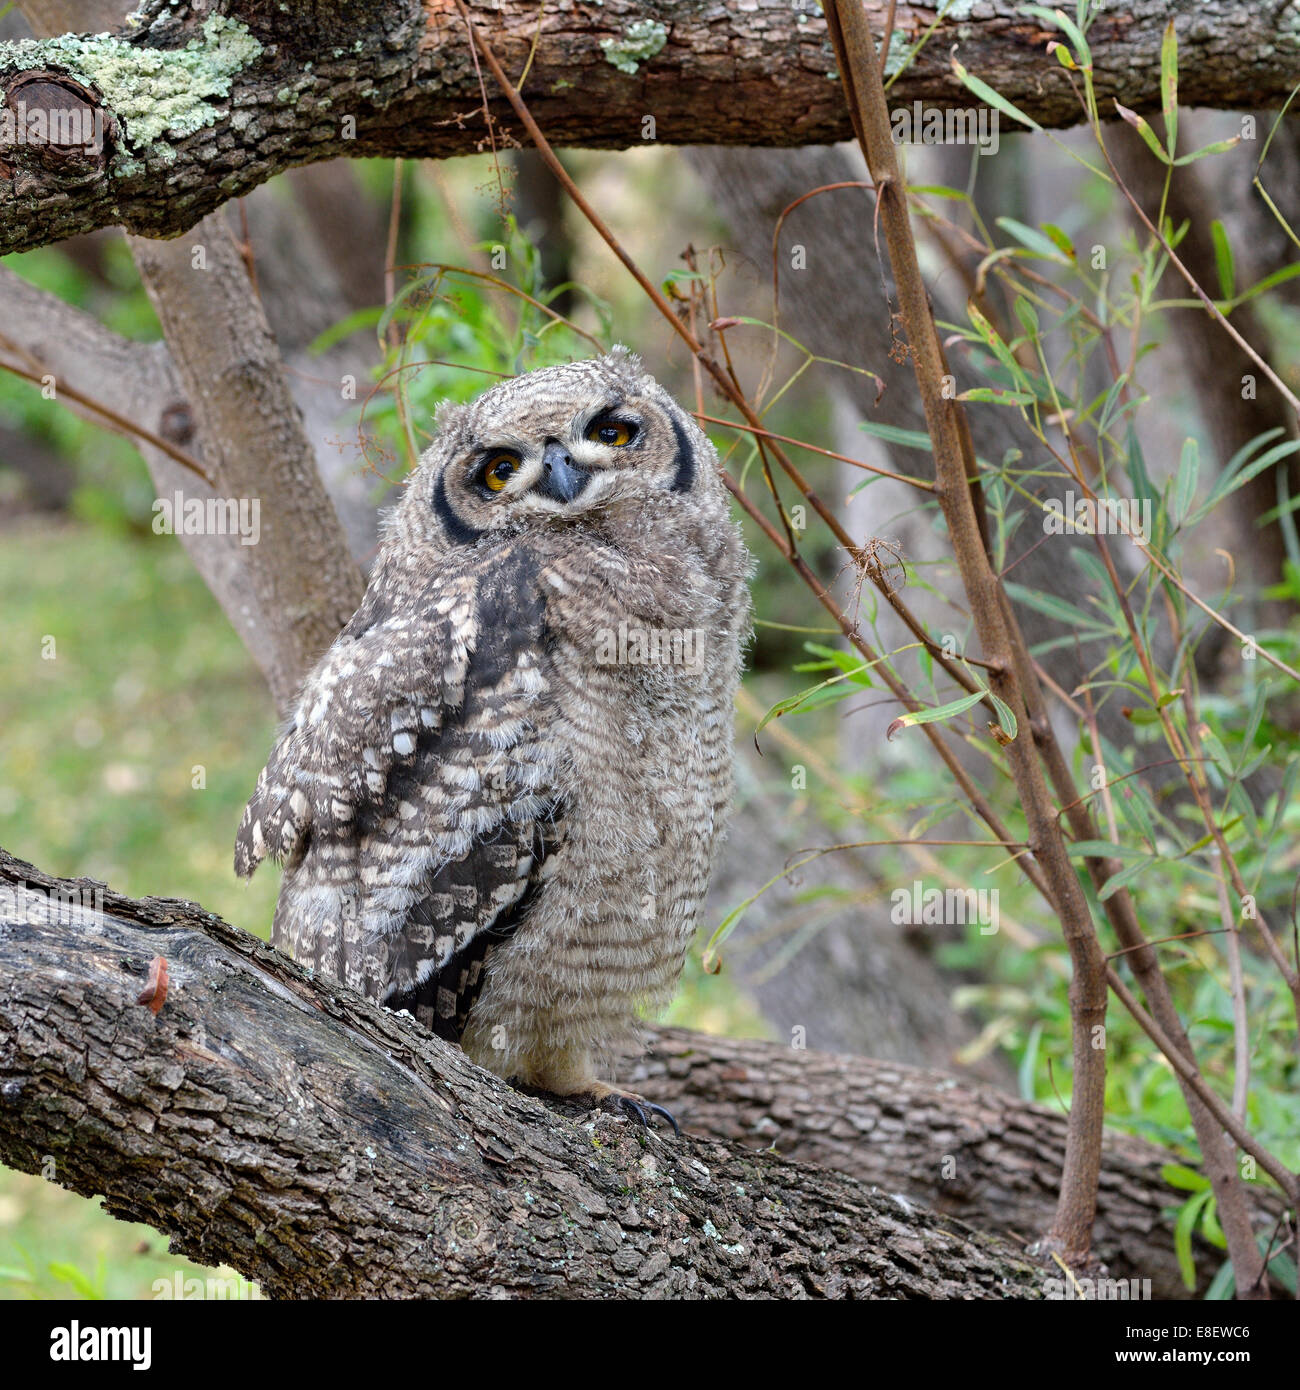 Spotted Eagle-Owl (Bubo africanus), young bird, Kirstenbosch National Botanical Garden, Cape Town, Western Cape, South Africa Stock Photo